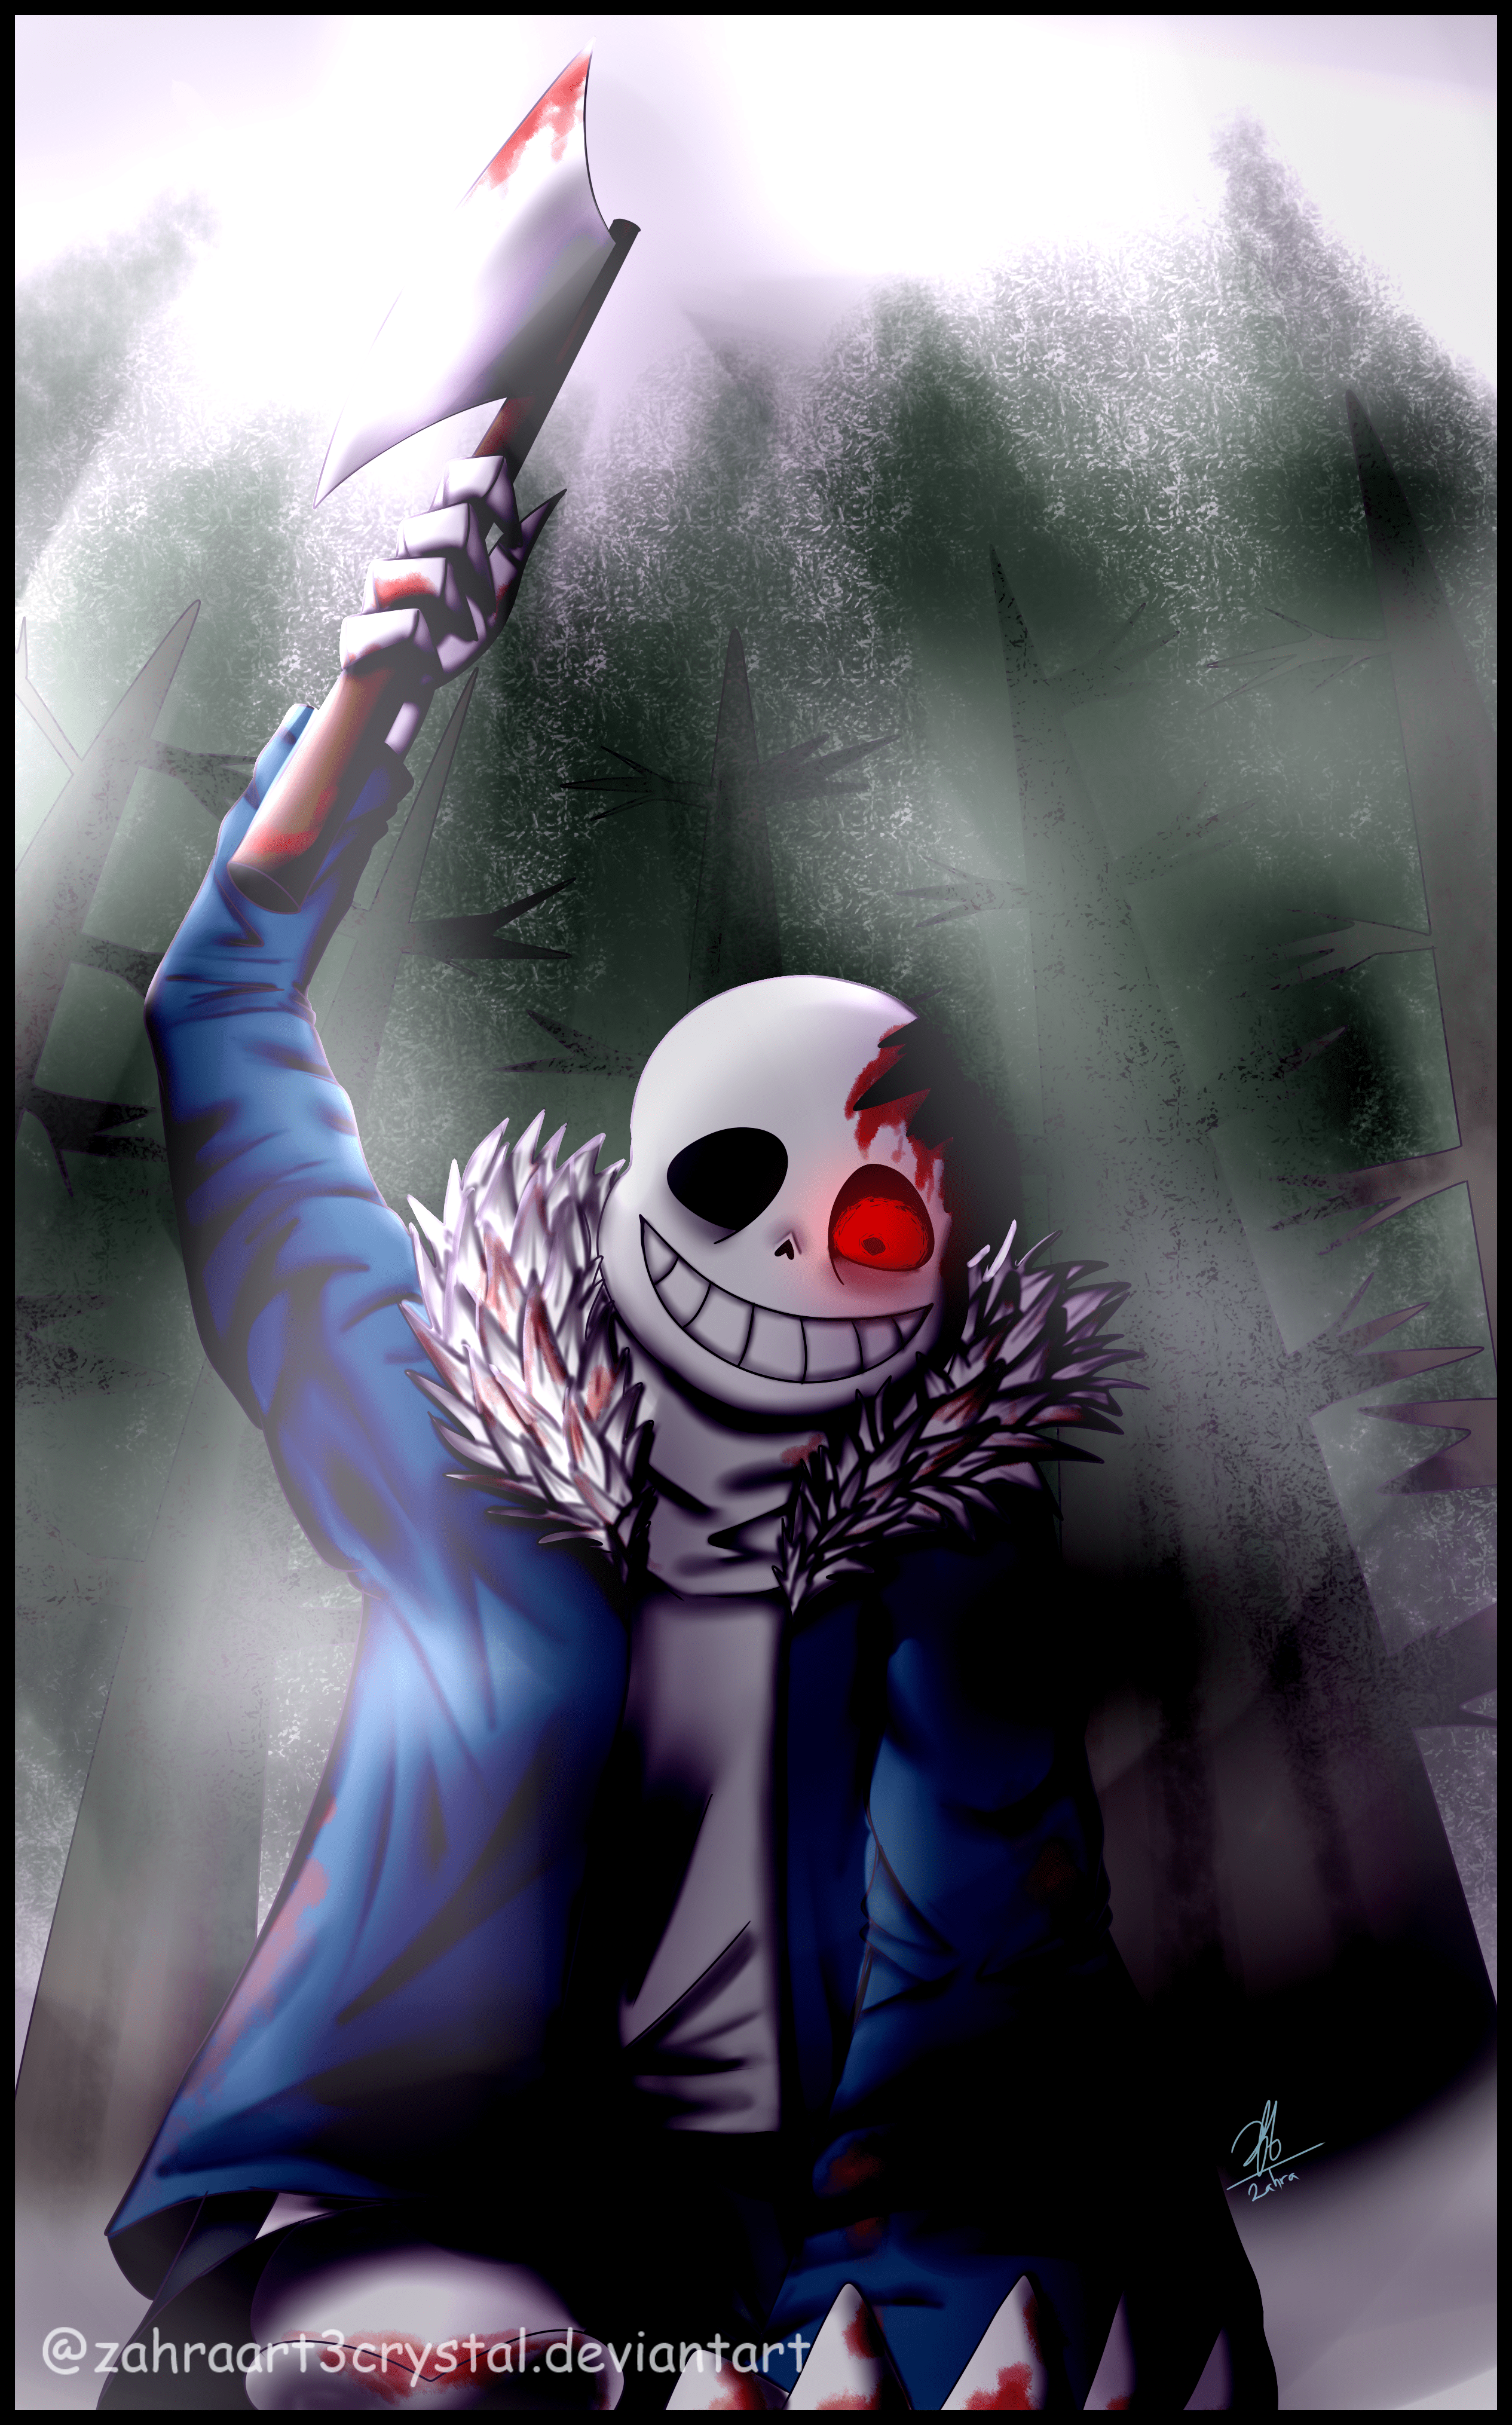 X 上的-- Hiatus --：「Since we're all loving creepy wiki Sans, I propose we  return to simpler times and embrace all horror themed AUs. I bring an  offering of UnderswapWorld Blue.  /